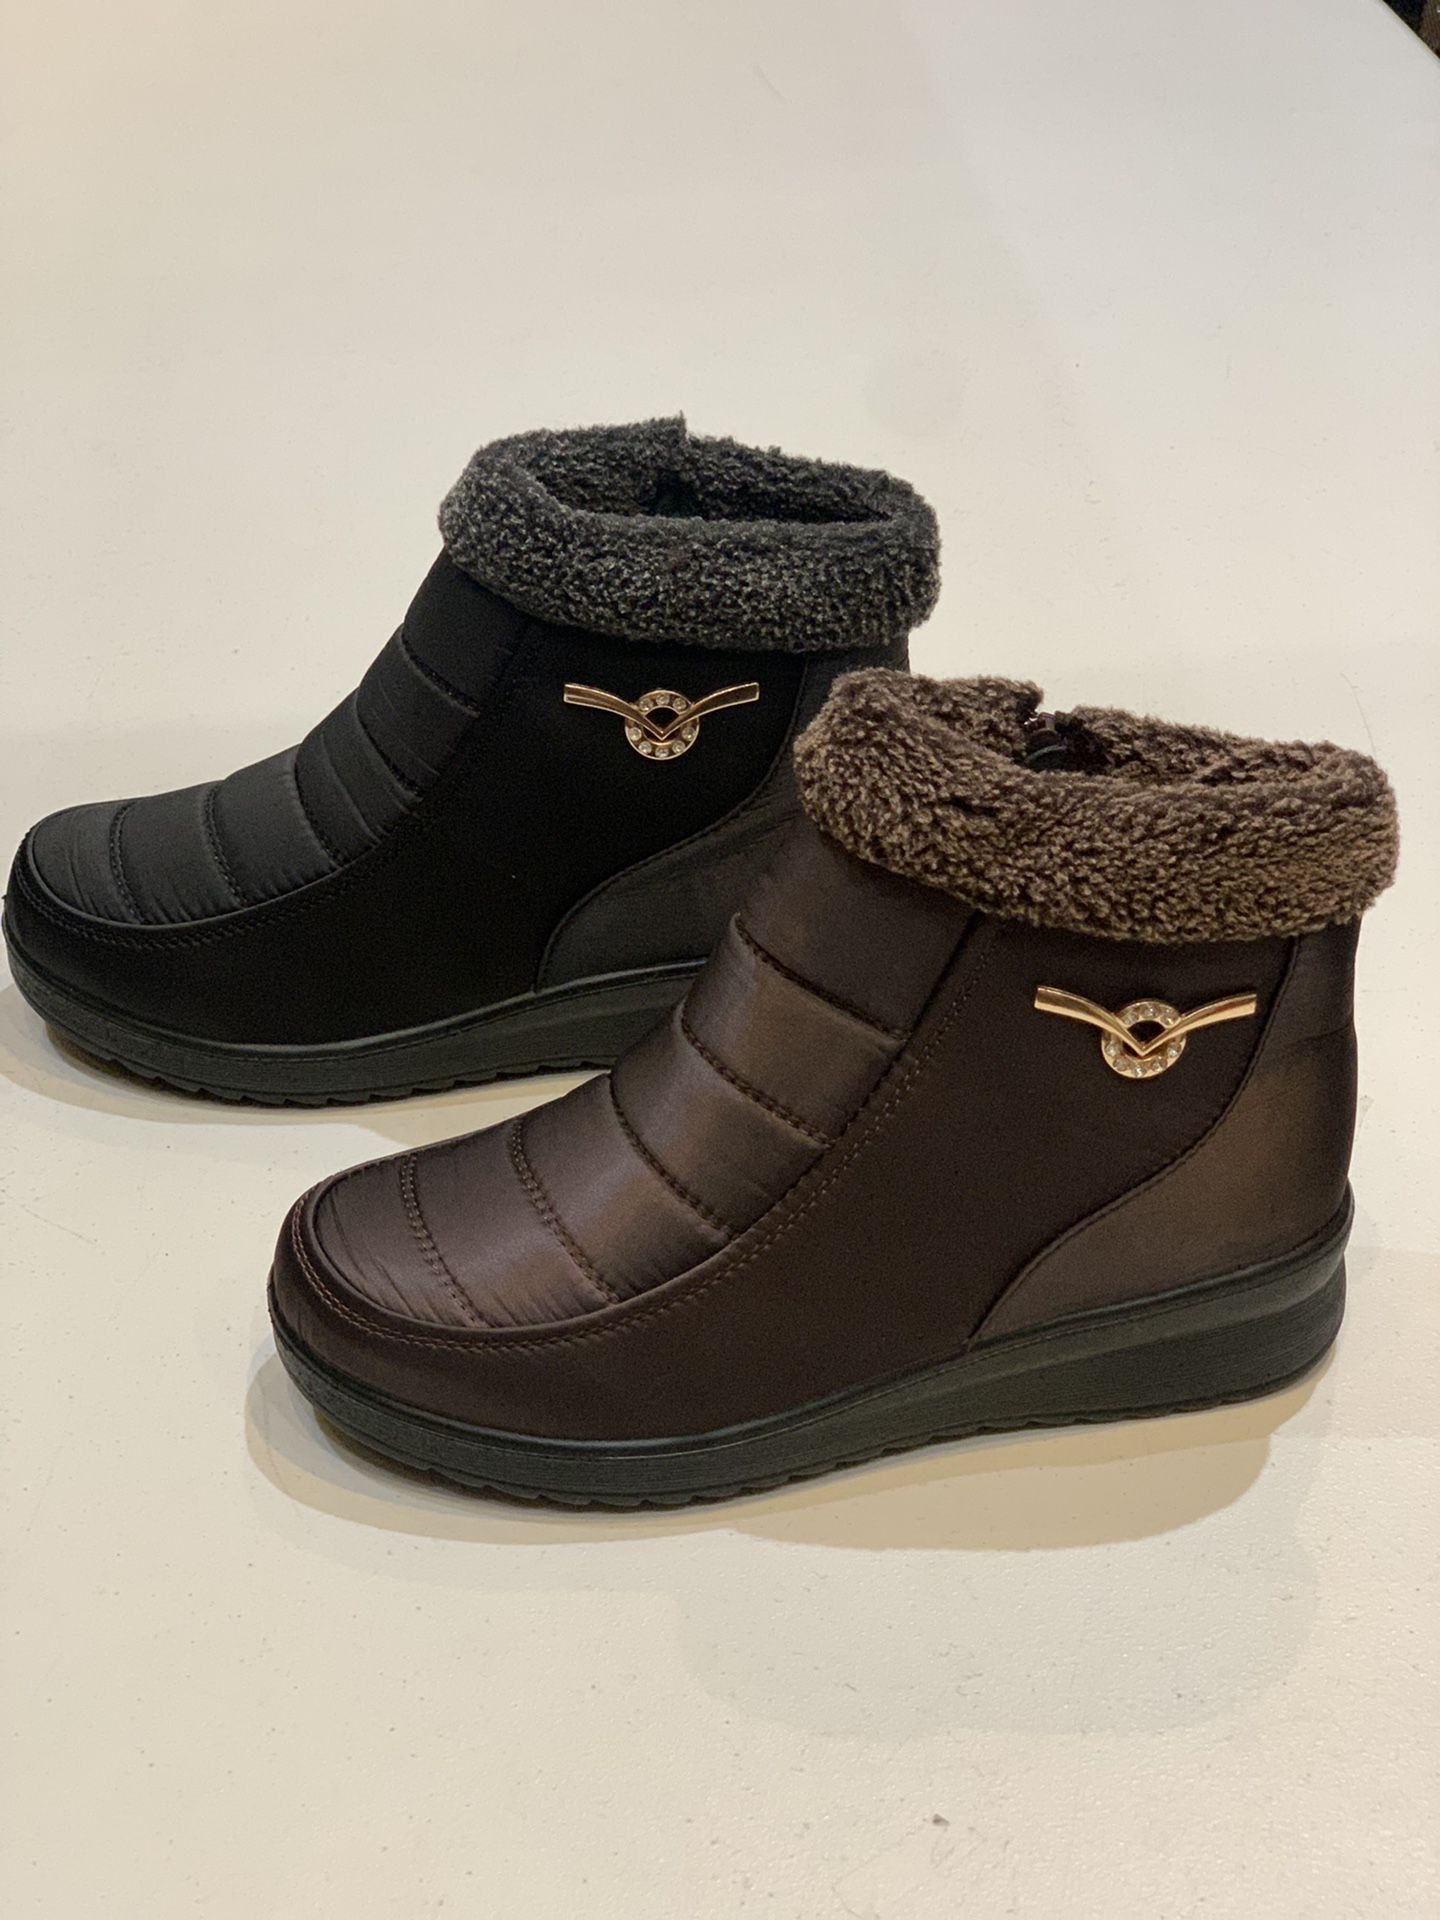 Snow Boots For Women Warm Cozy Boots Sizes Available 